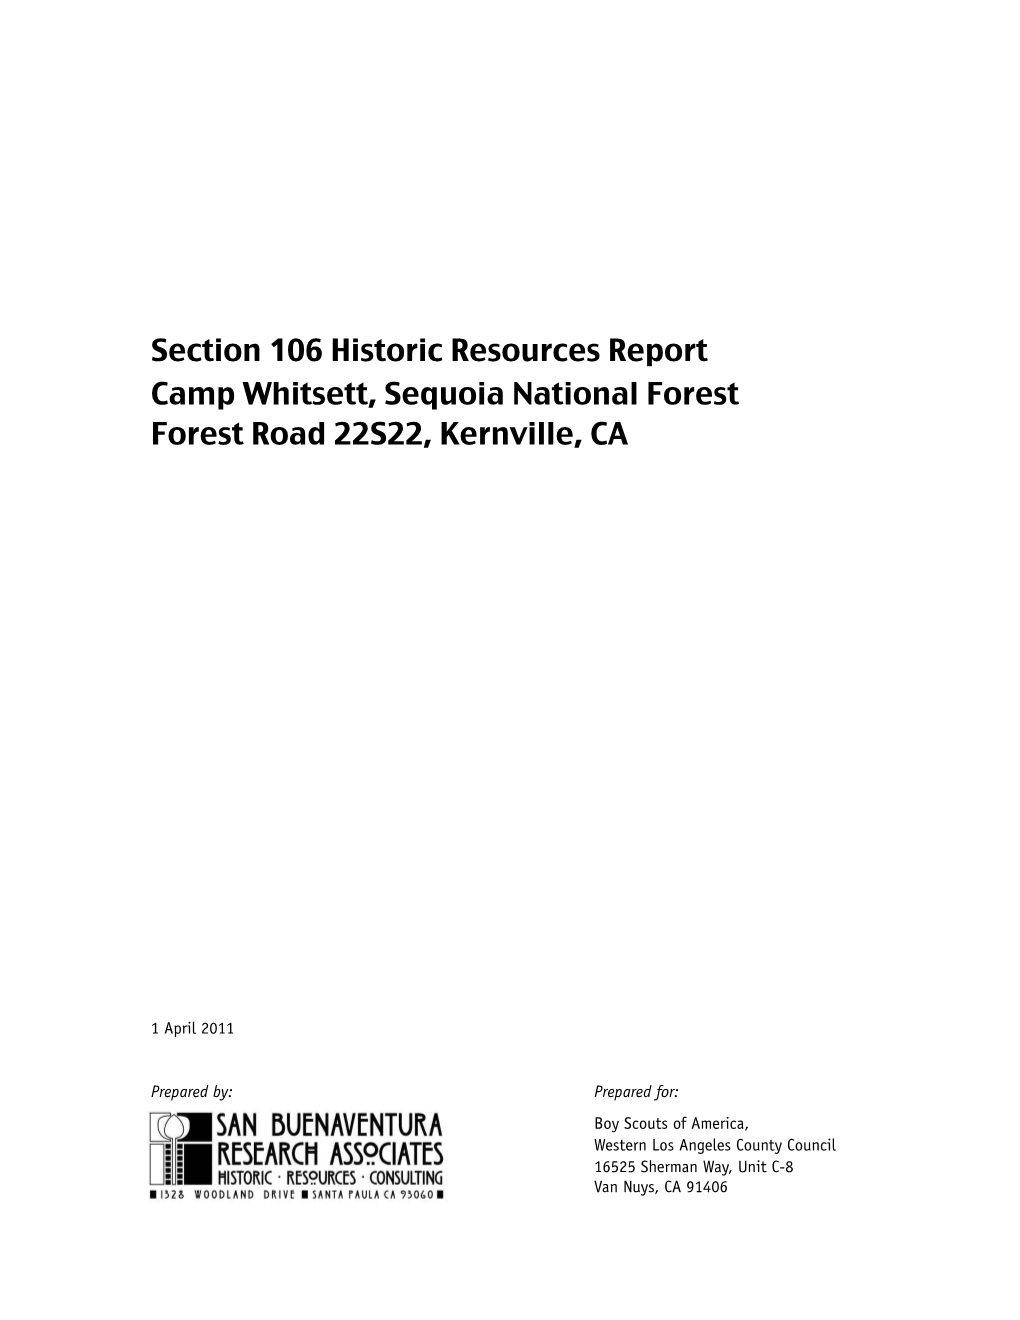 Section 106 Historic Resources Report Camp Whitsett, Sequoia National Forest Forest Road 22S22, Kernville, CA